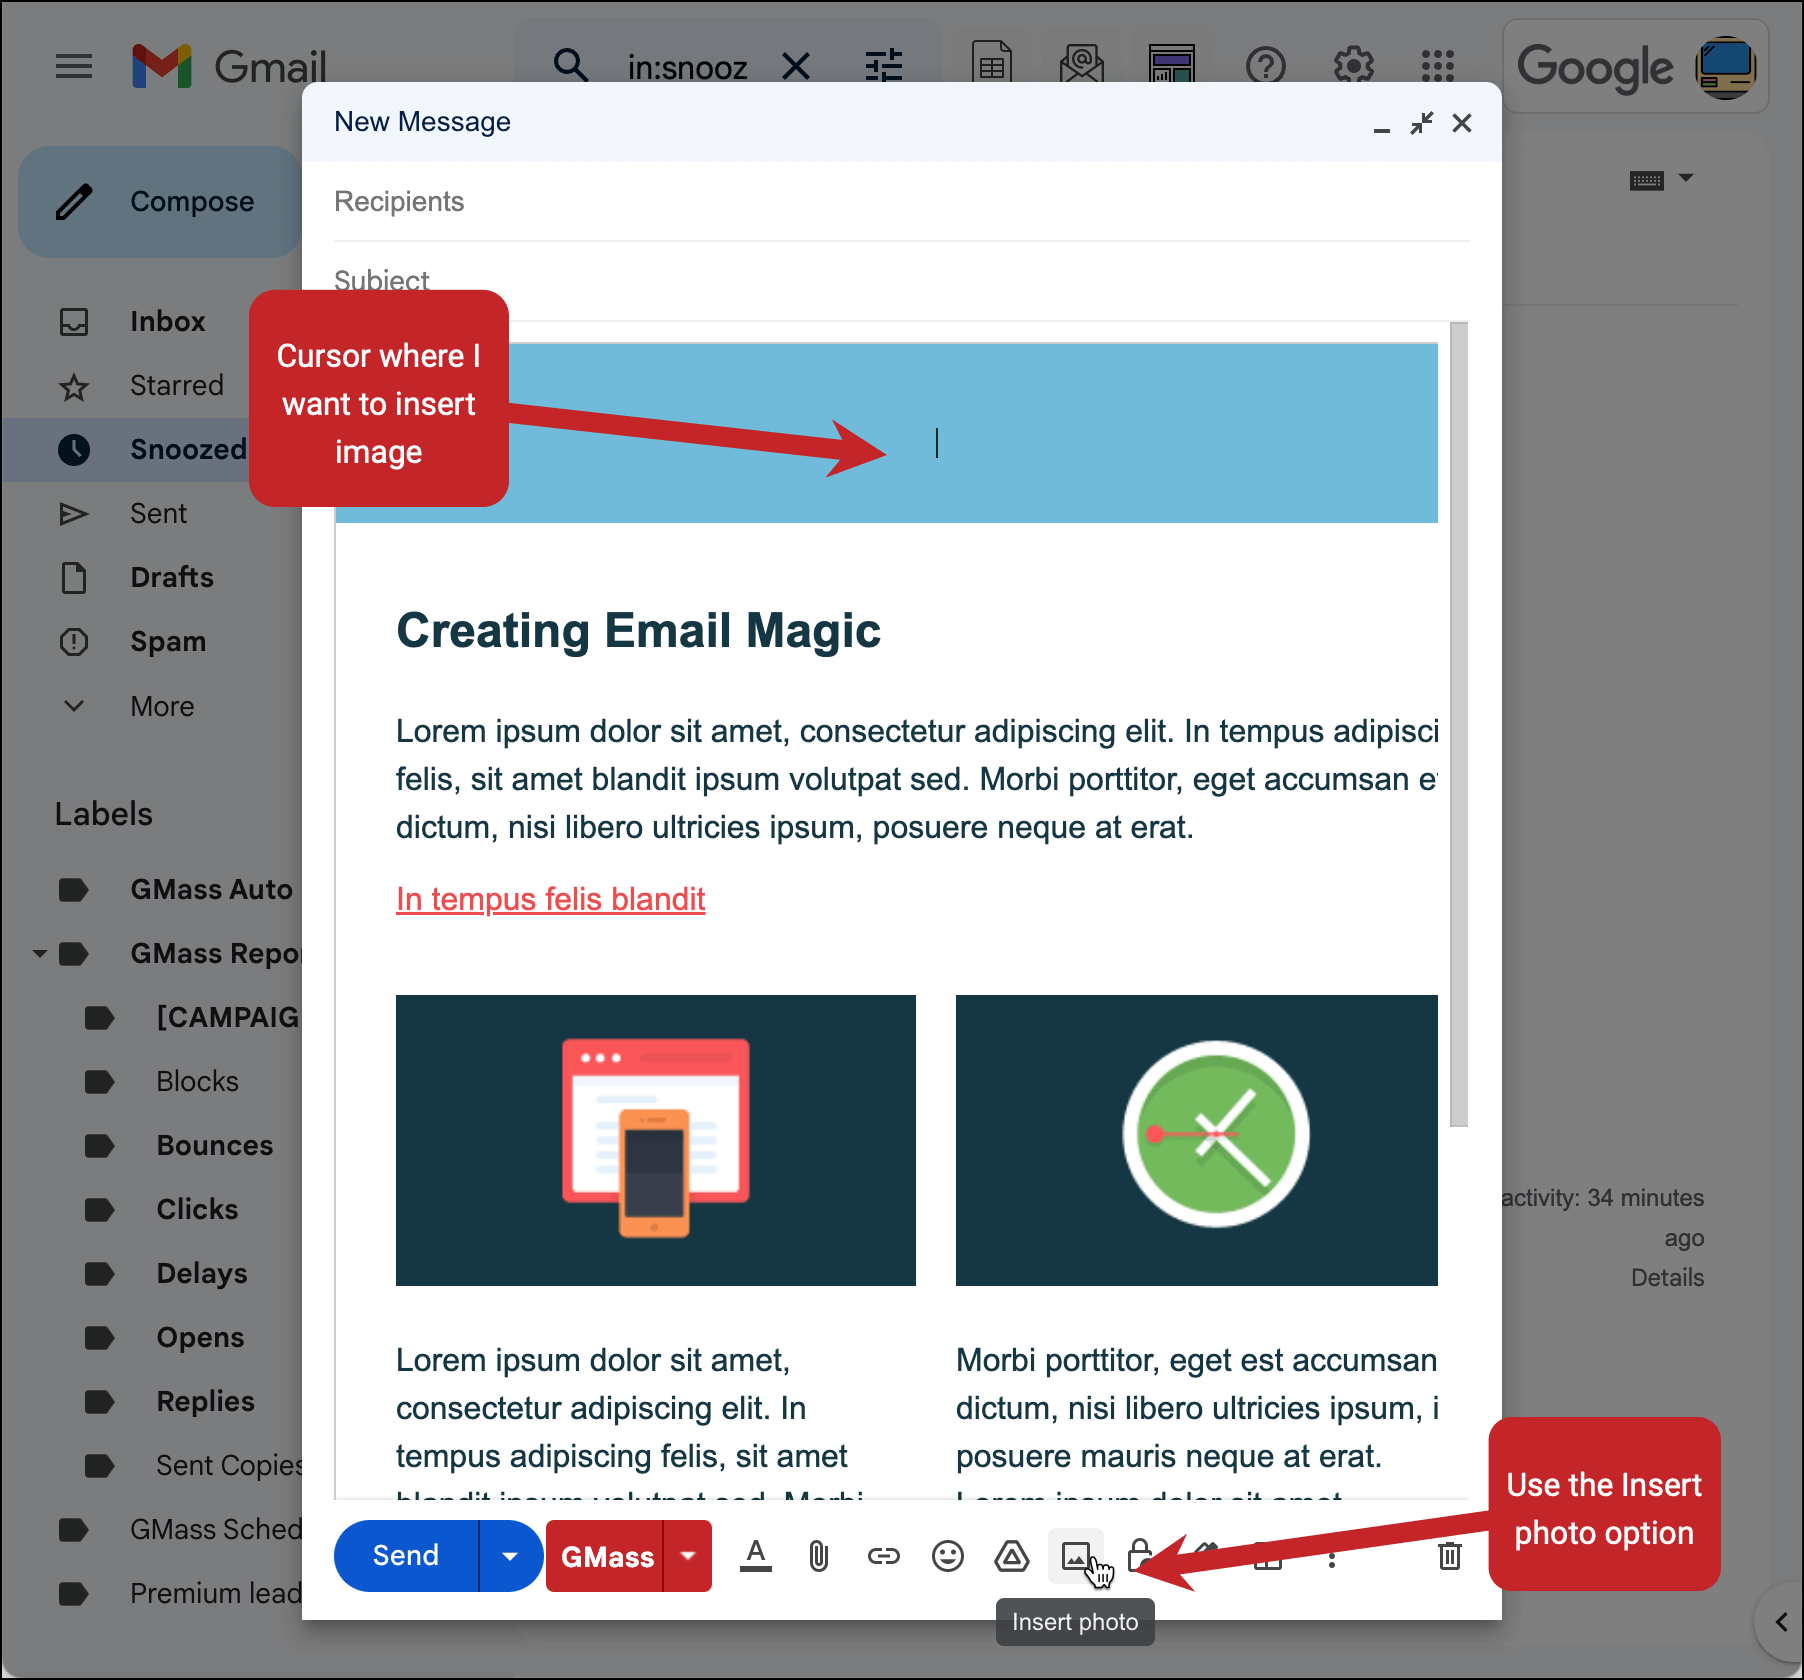 Insert a new image into a Gmail message